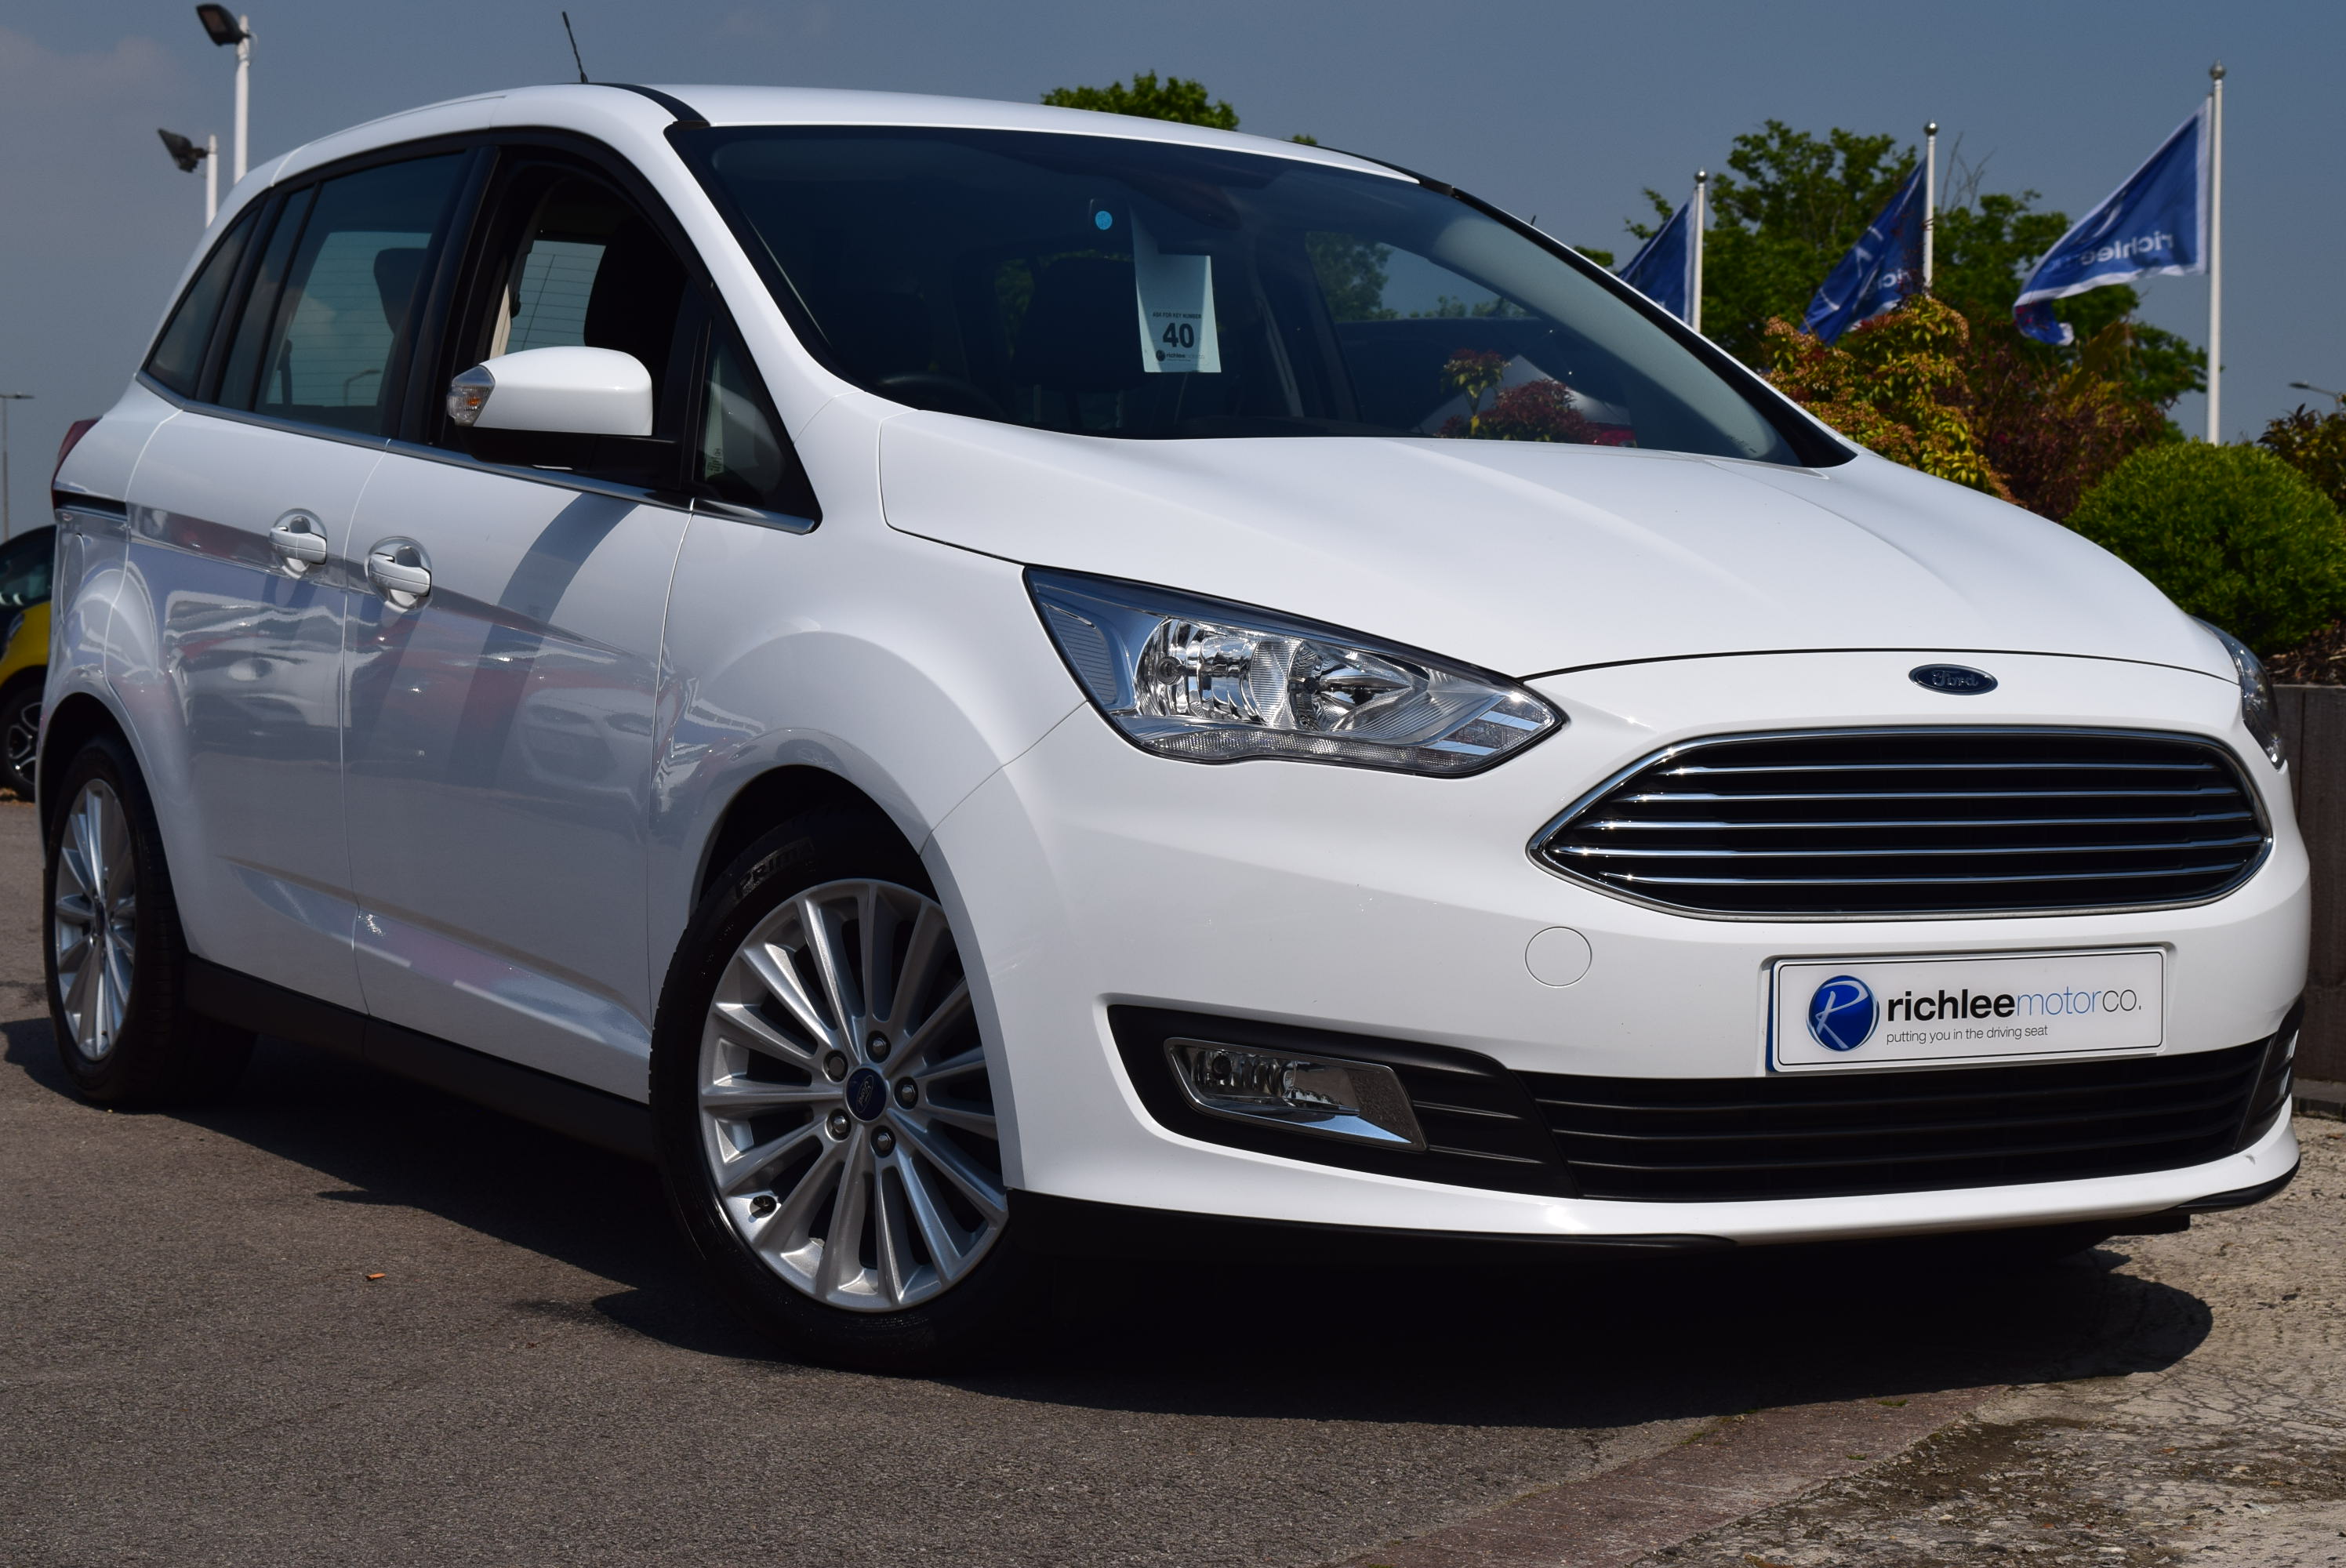 FORD GRAND CMAX 2.0 TDCi Titanium 5dr For Sale Richlee